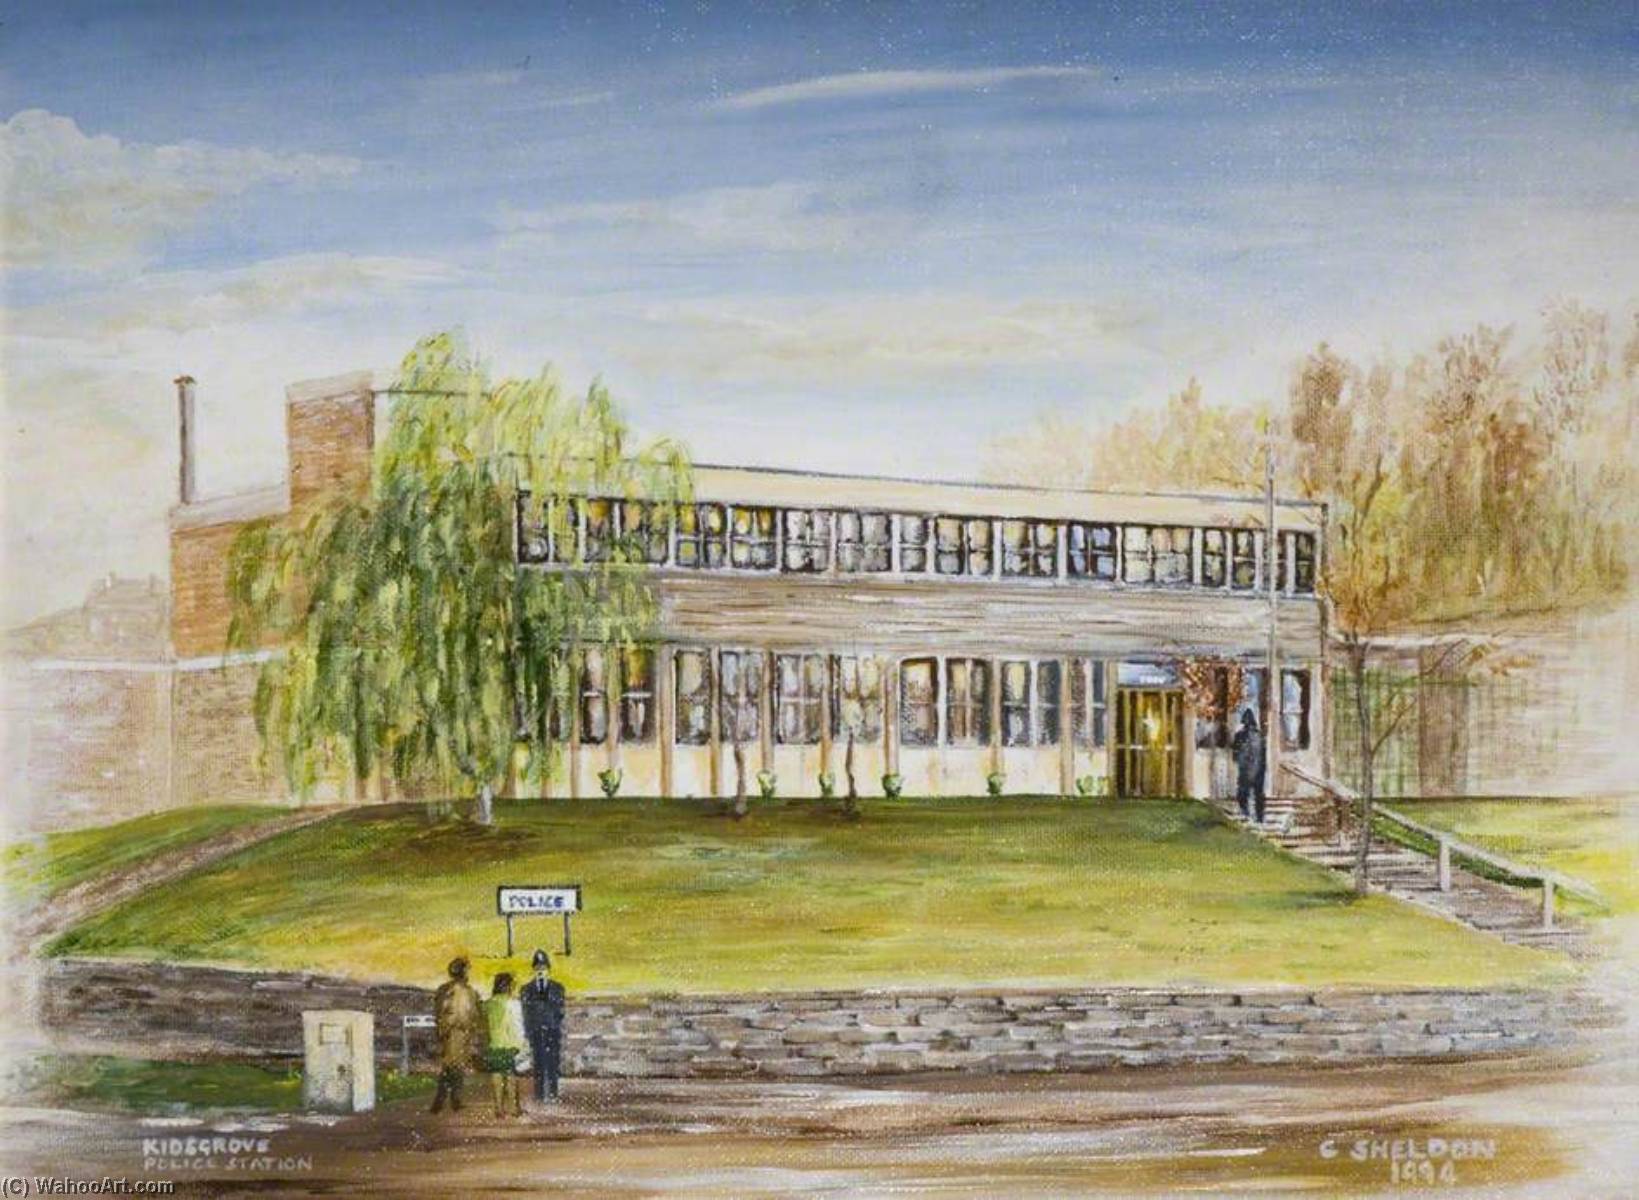 Kidsgrove Police Station, 1994 by Christopher William Sheldon (1948-2016) Christopher William Sheldon | ArtsDot.com